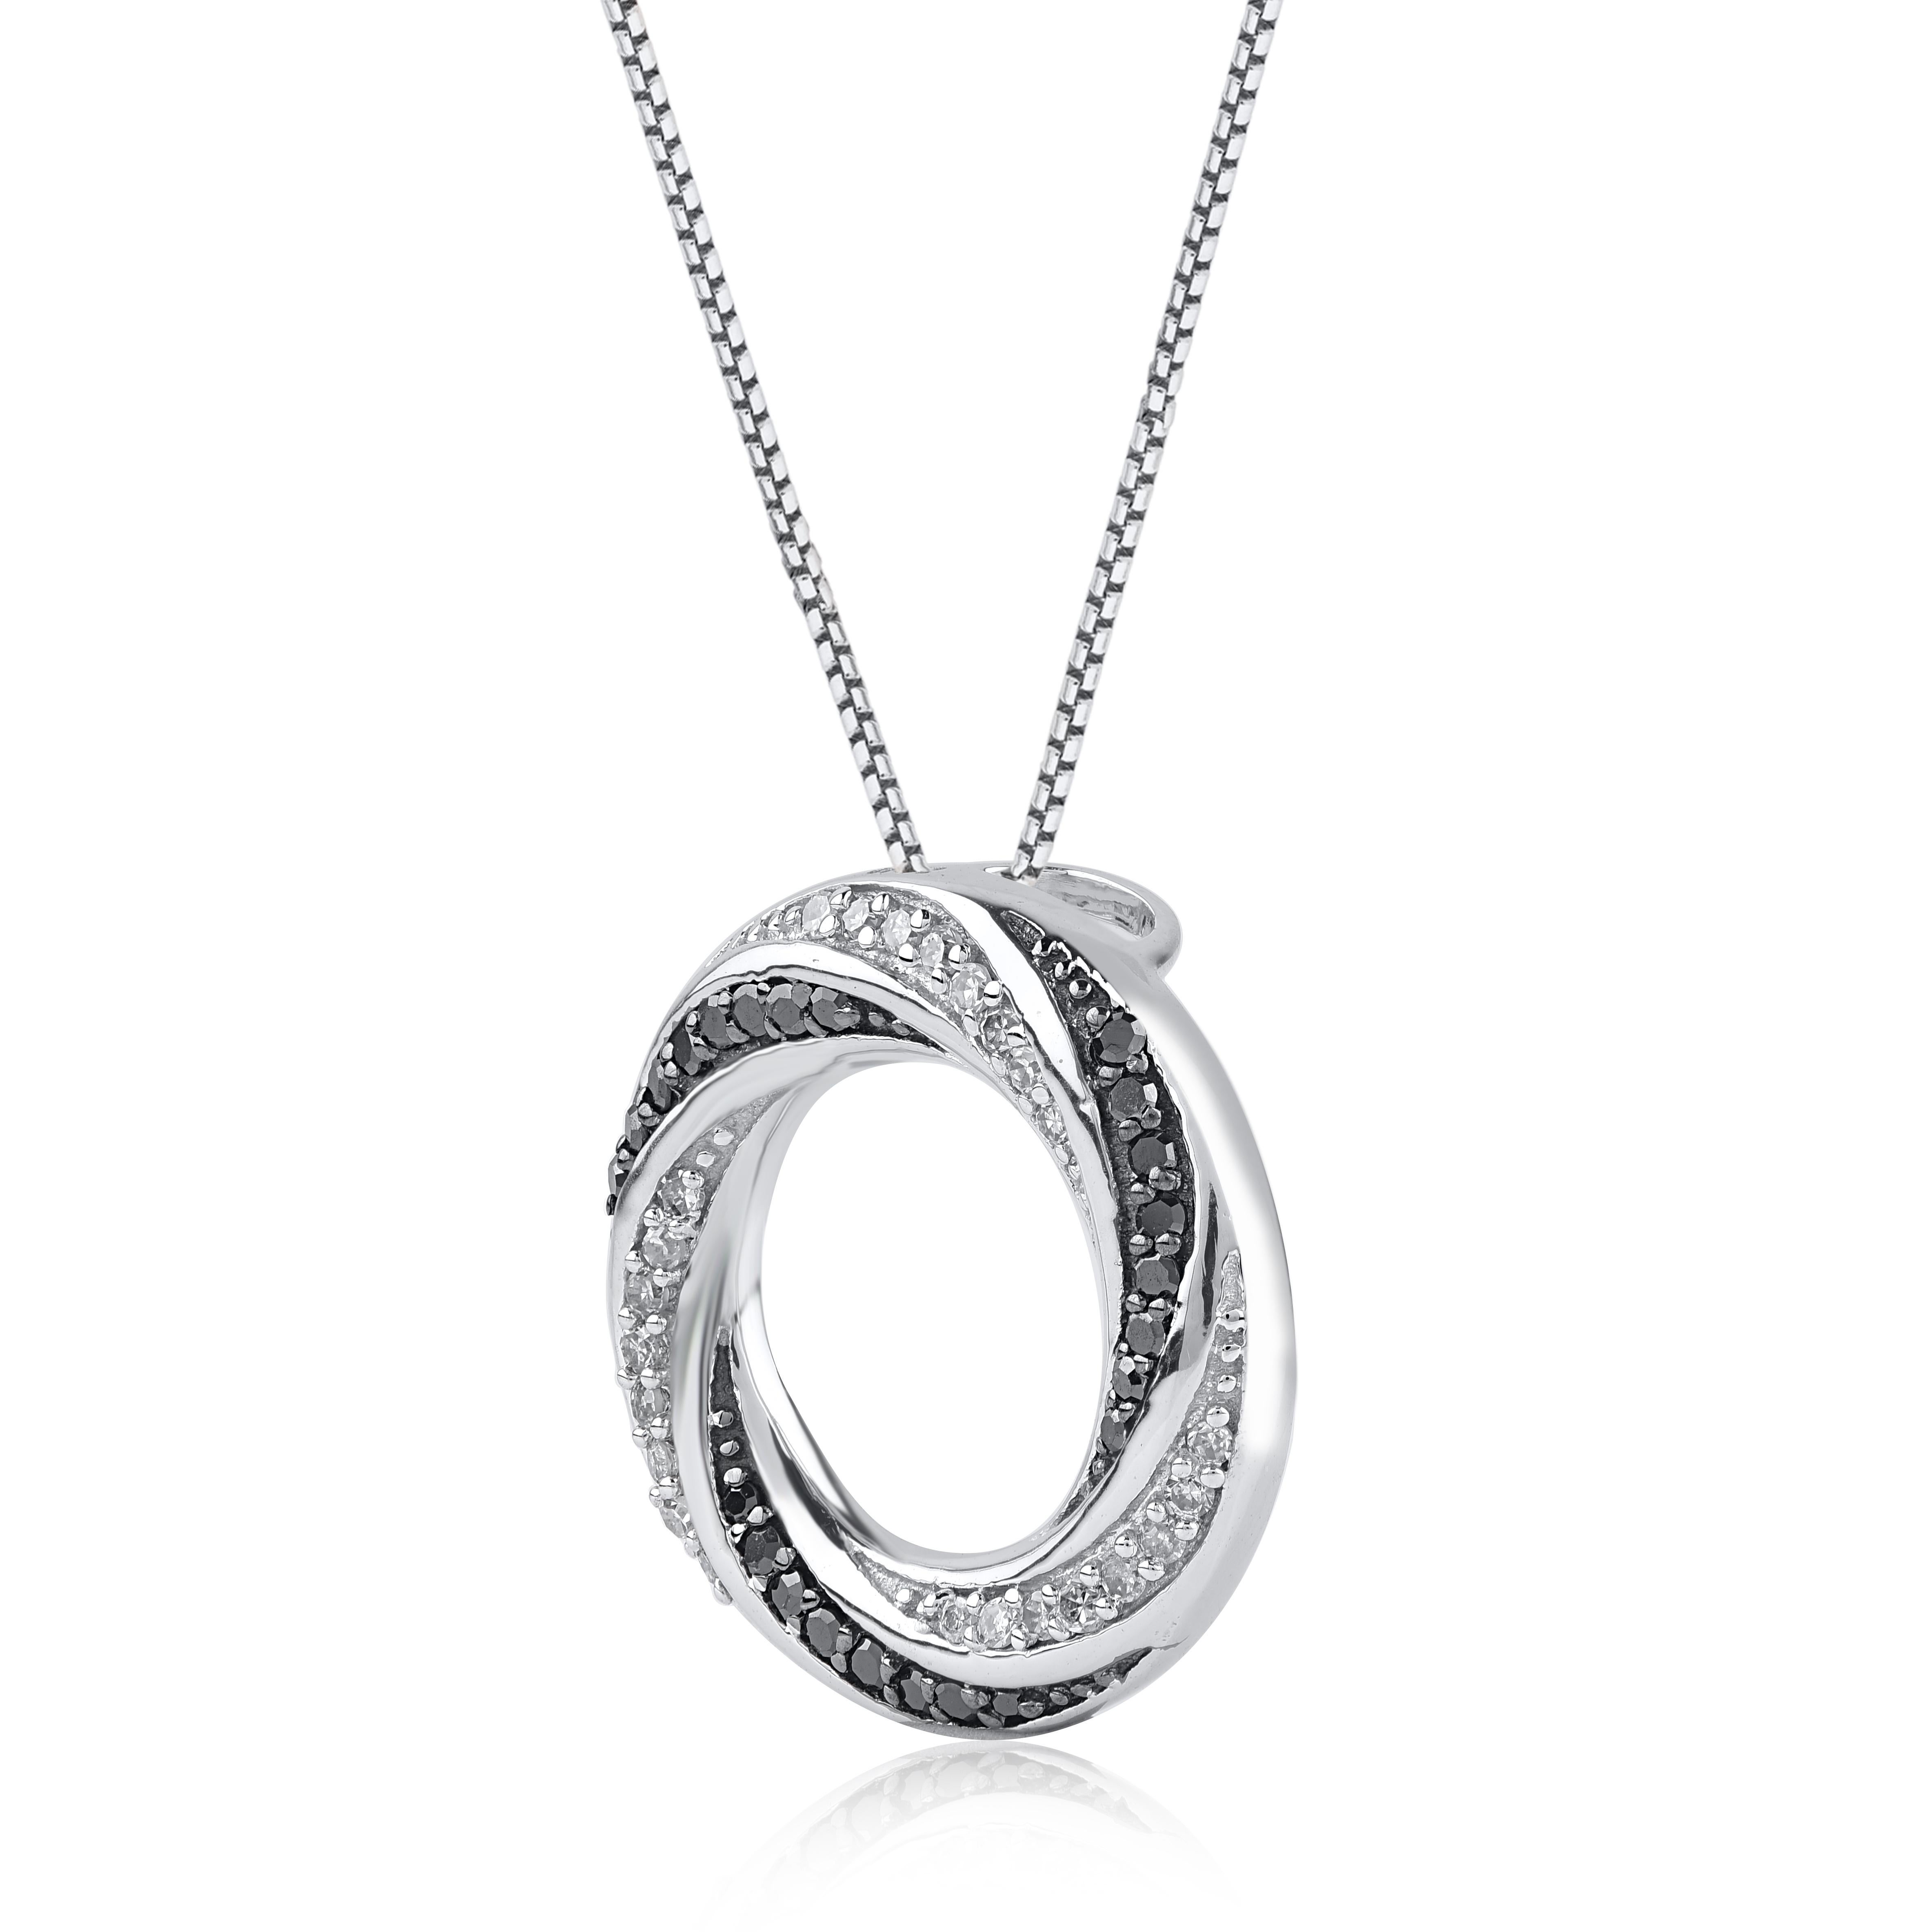 A striking addition when worn on its own, this diamond pendant makes a stunning impression. The pendant is crafted from 14-karat gold in your choice of white, rose, or yellow, and features round single cut 48 white and black treated diamonds pave